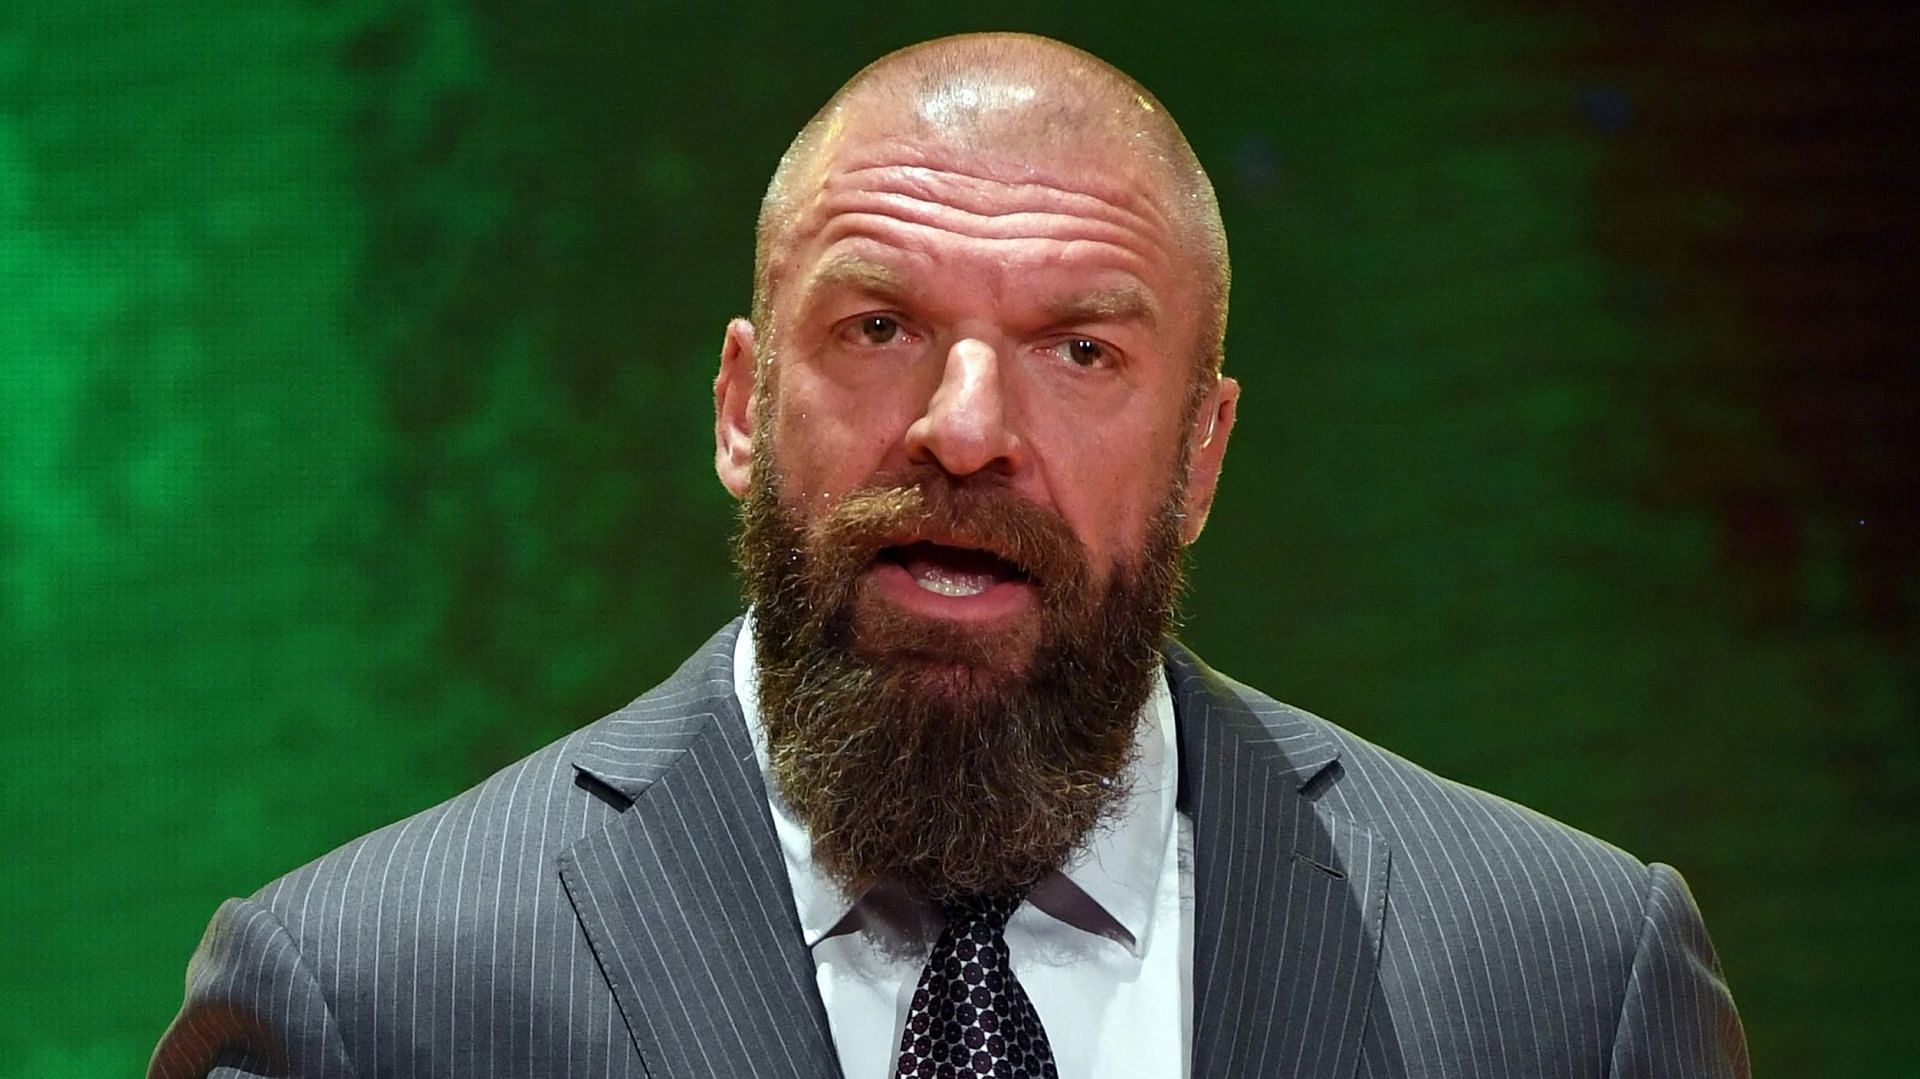 Latest Wwe Signing Given New Ring Name By Triple H And Company Creative 